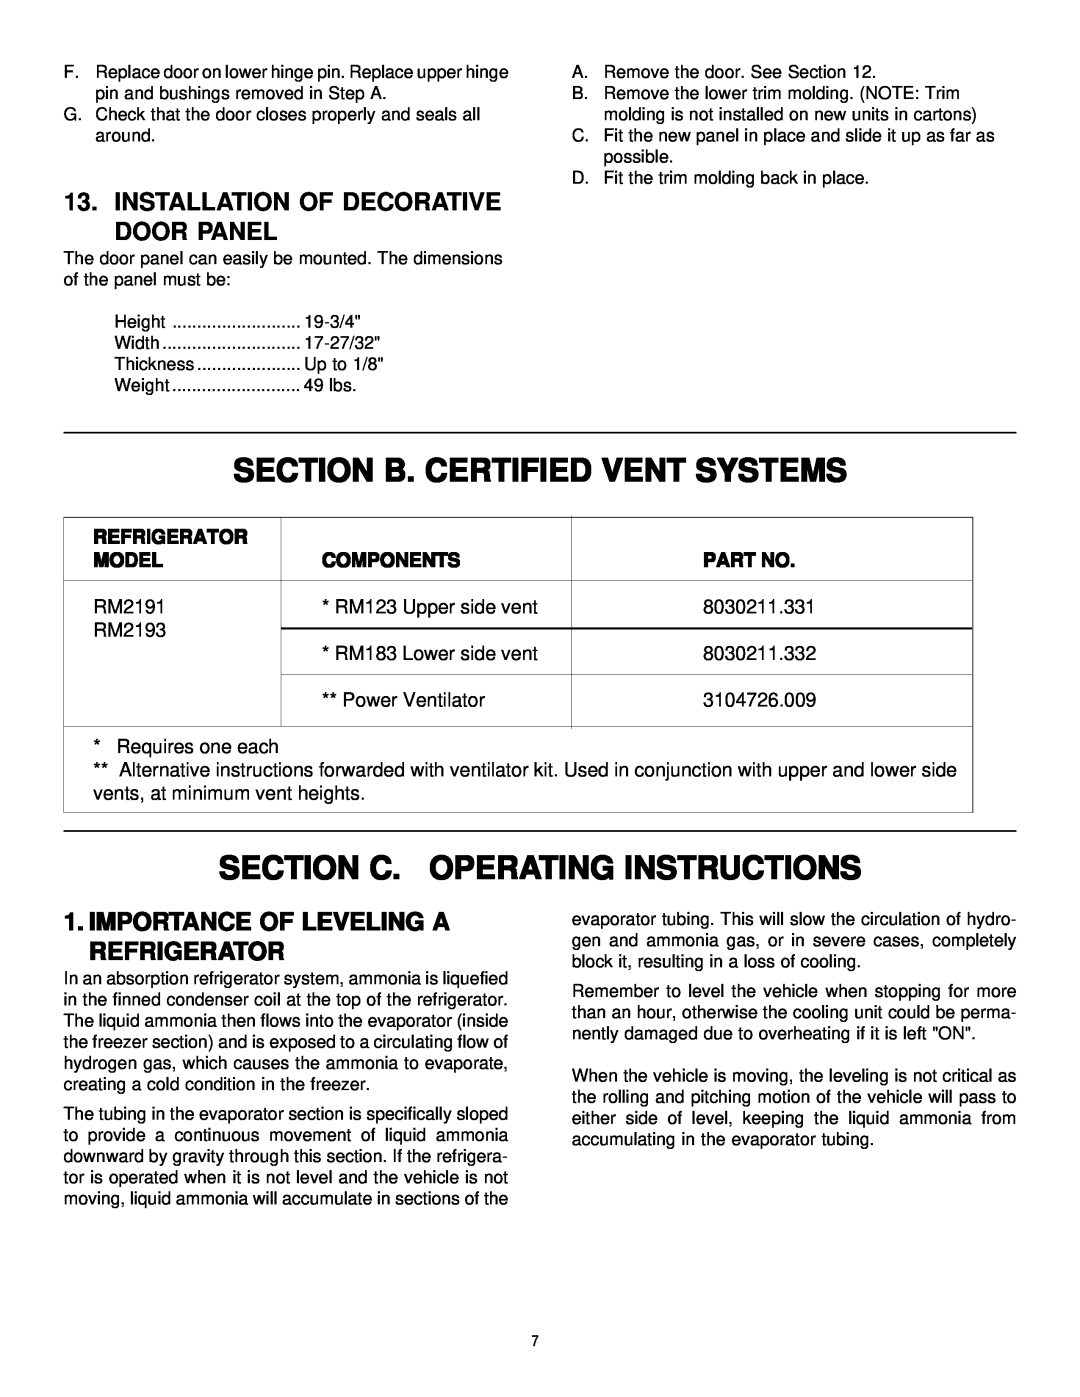 Dometic RM2191 Section B. Certified Vent Systems, Section C. Operating Instructions, Installation Of Decorative Door Panel 